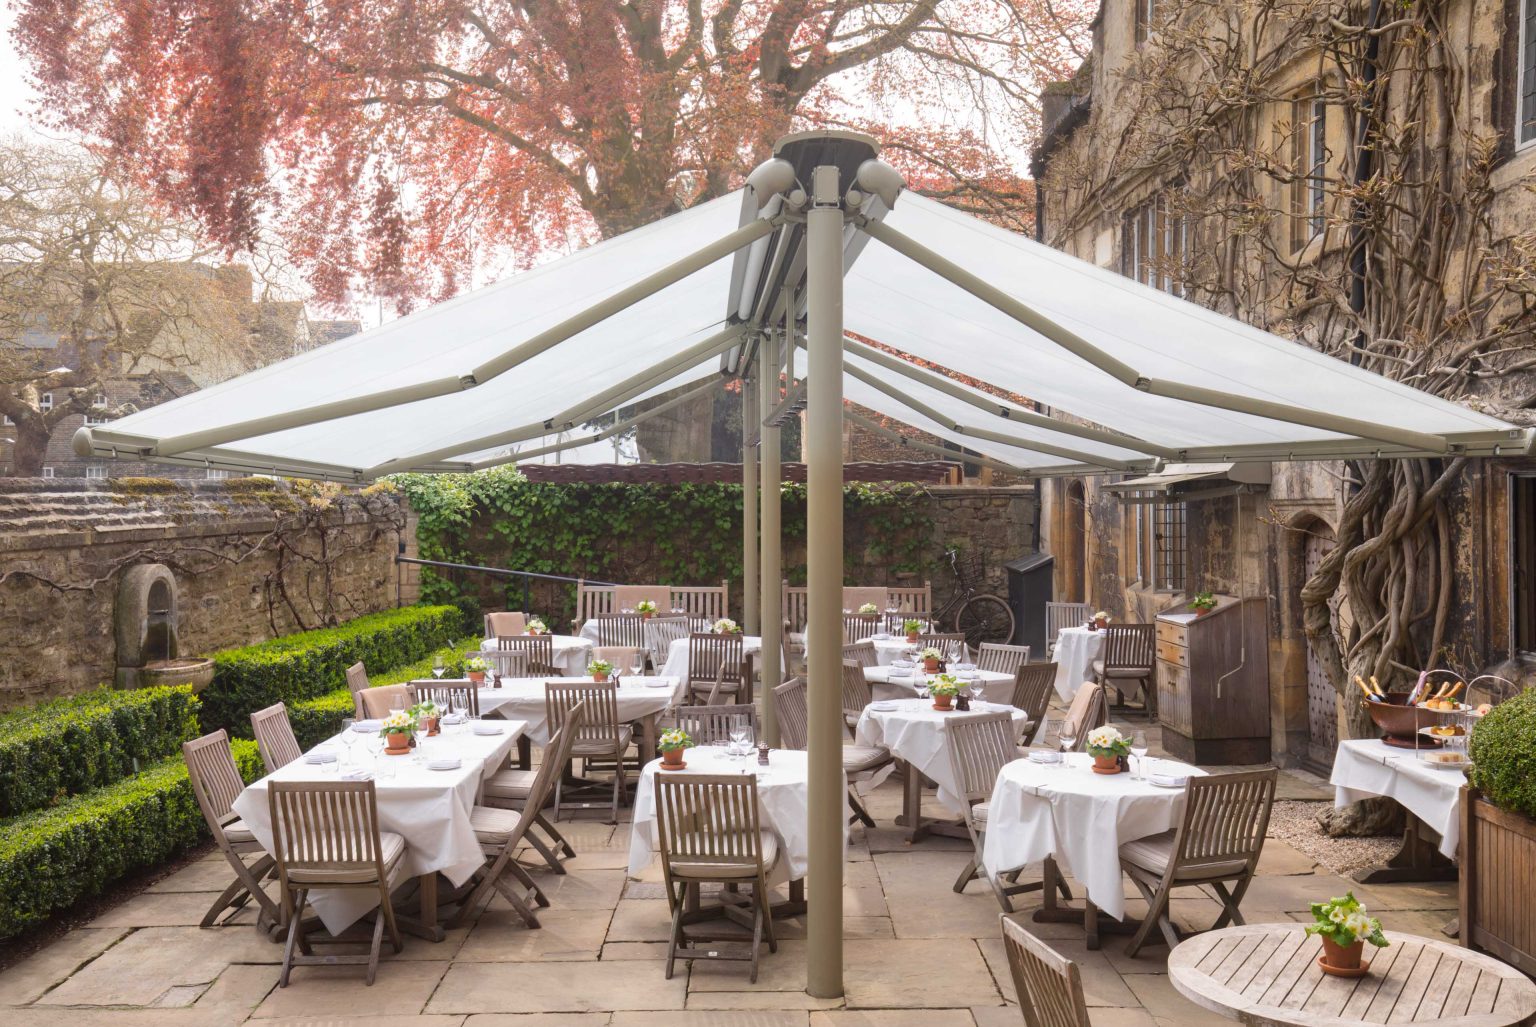 0006 - 2019 - Parsonage Grill - Oxford - High Res - Terrace Dining - Web Hero